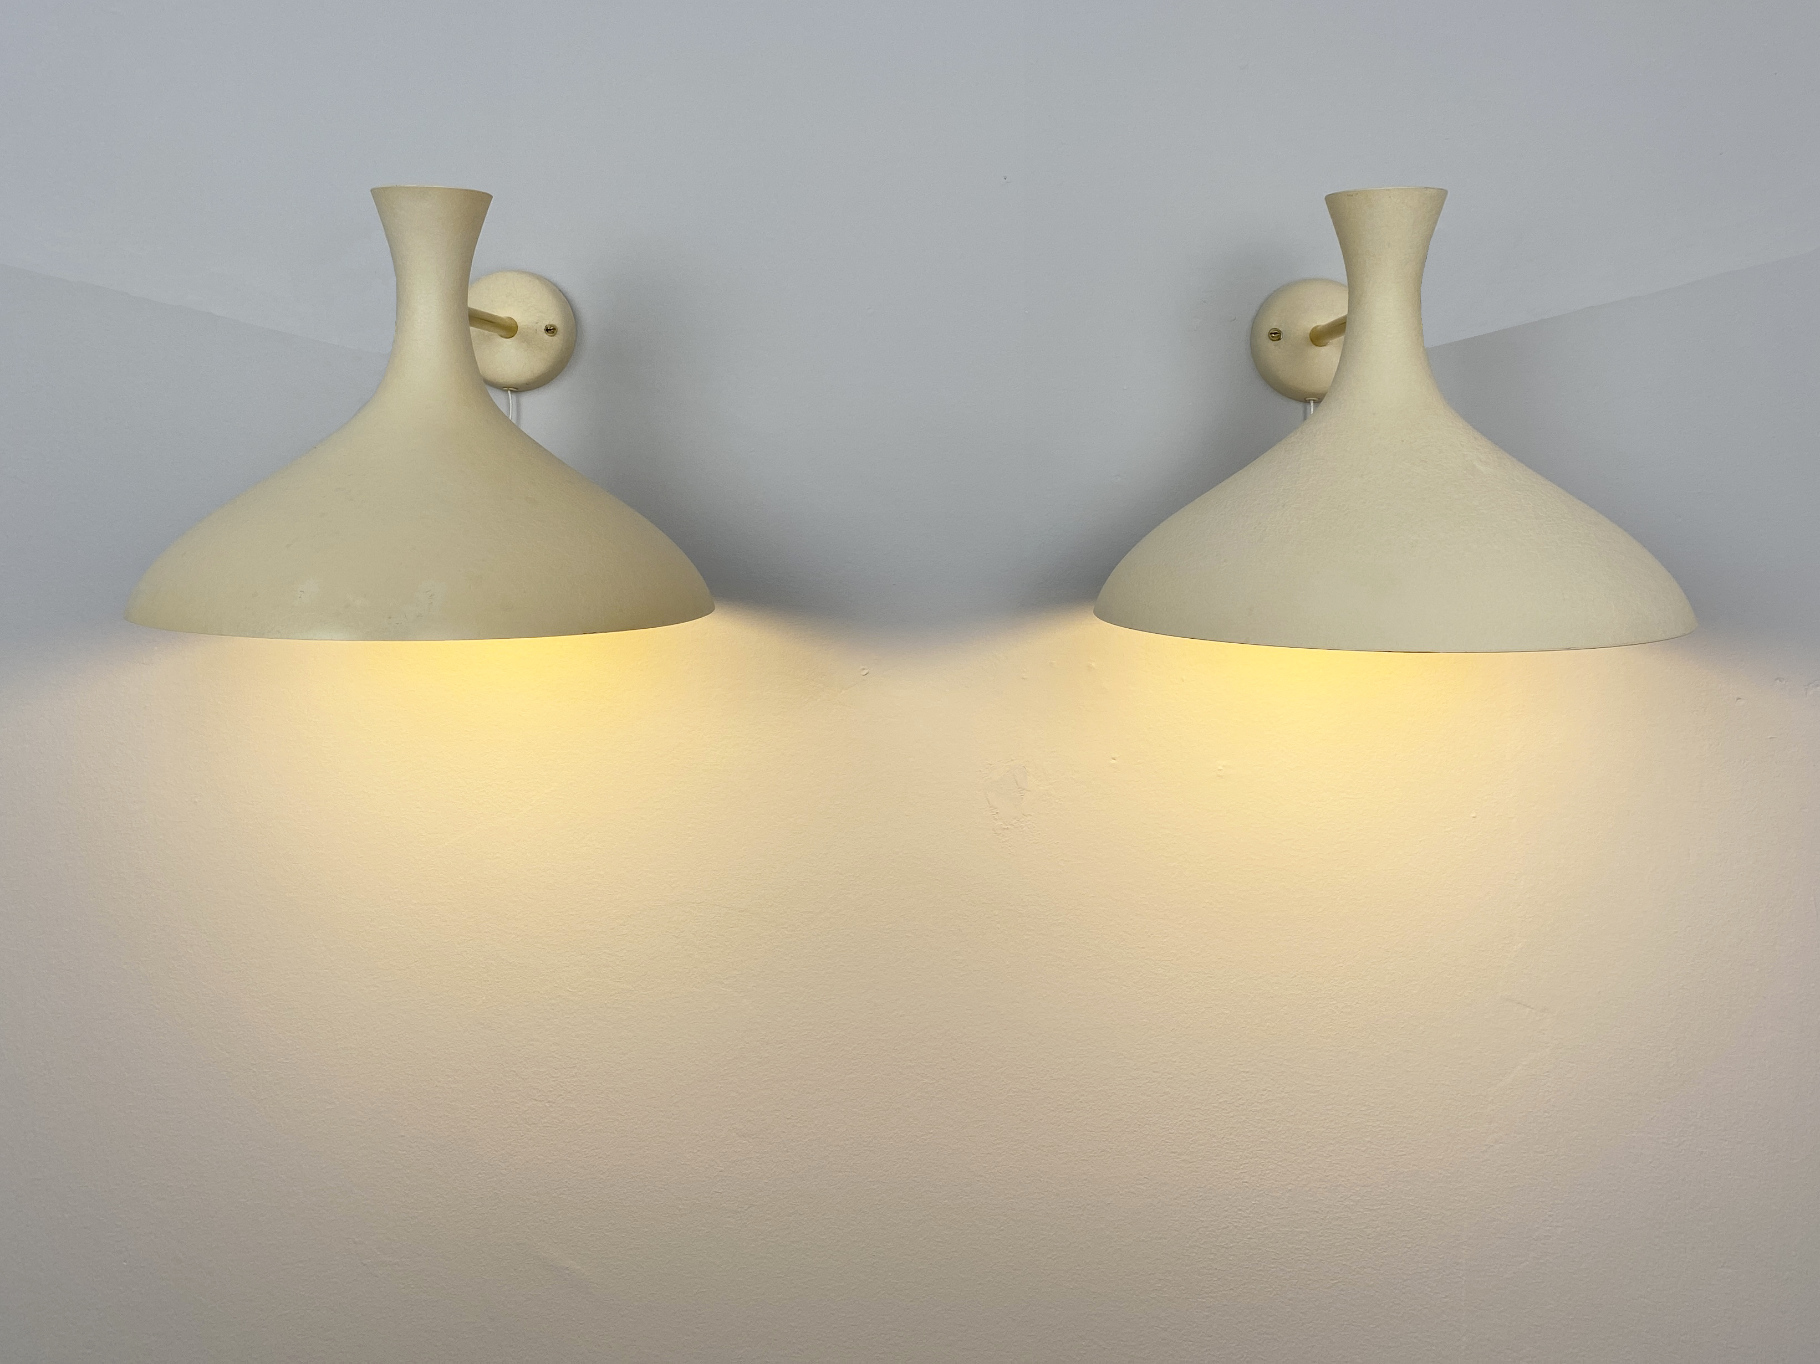 “SOLD” Pair of Rarely, Cream White Sconces / Wall Lamps by Cosack, Germany, 1950s